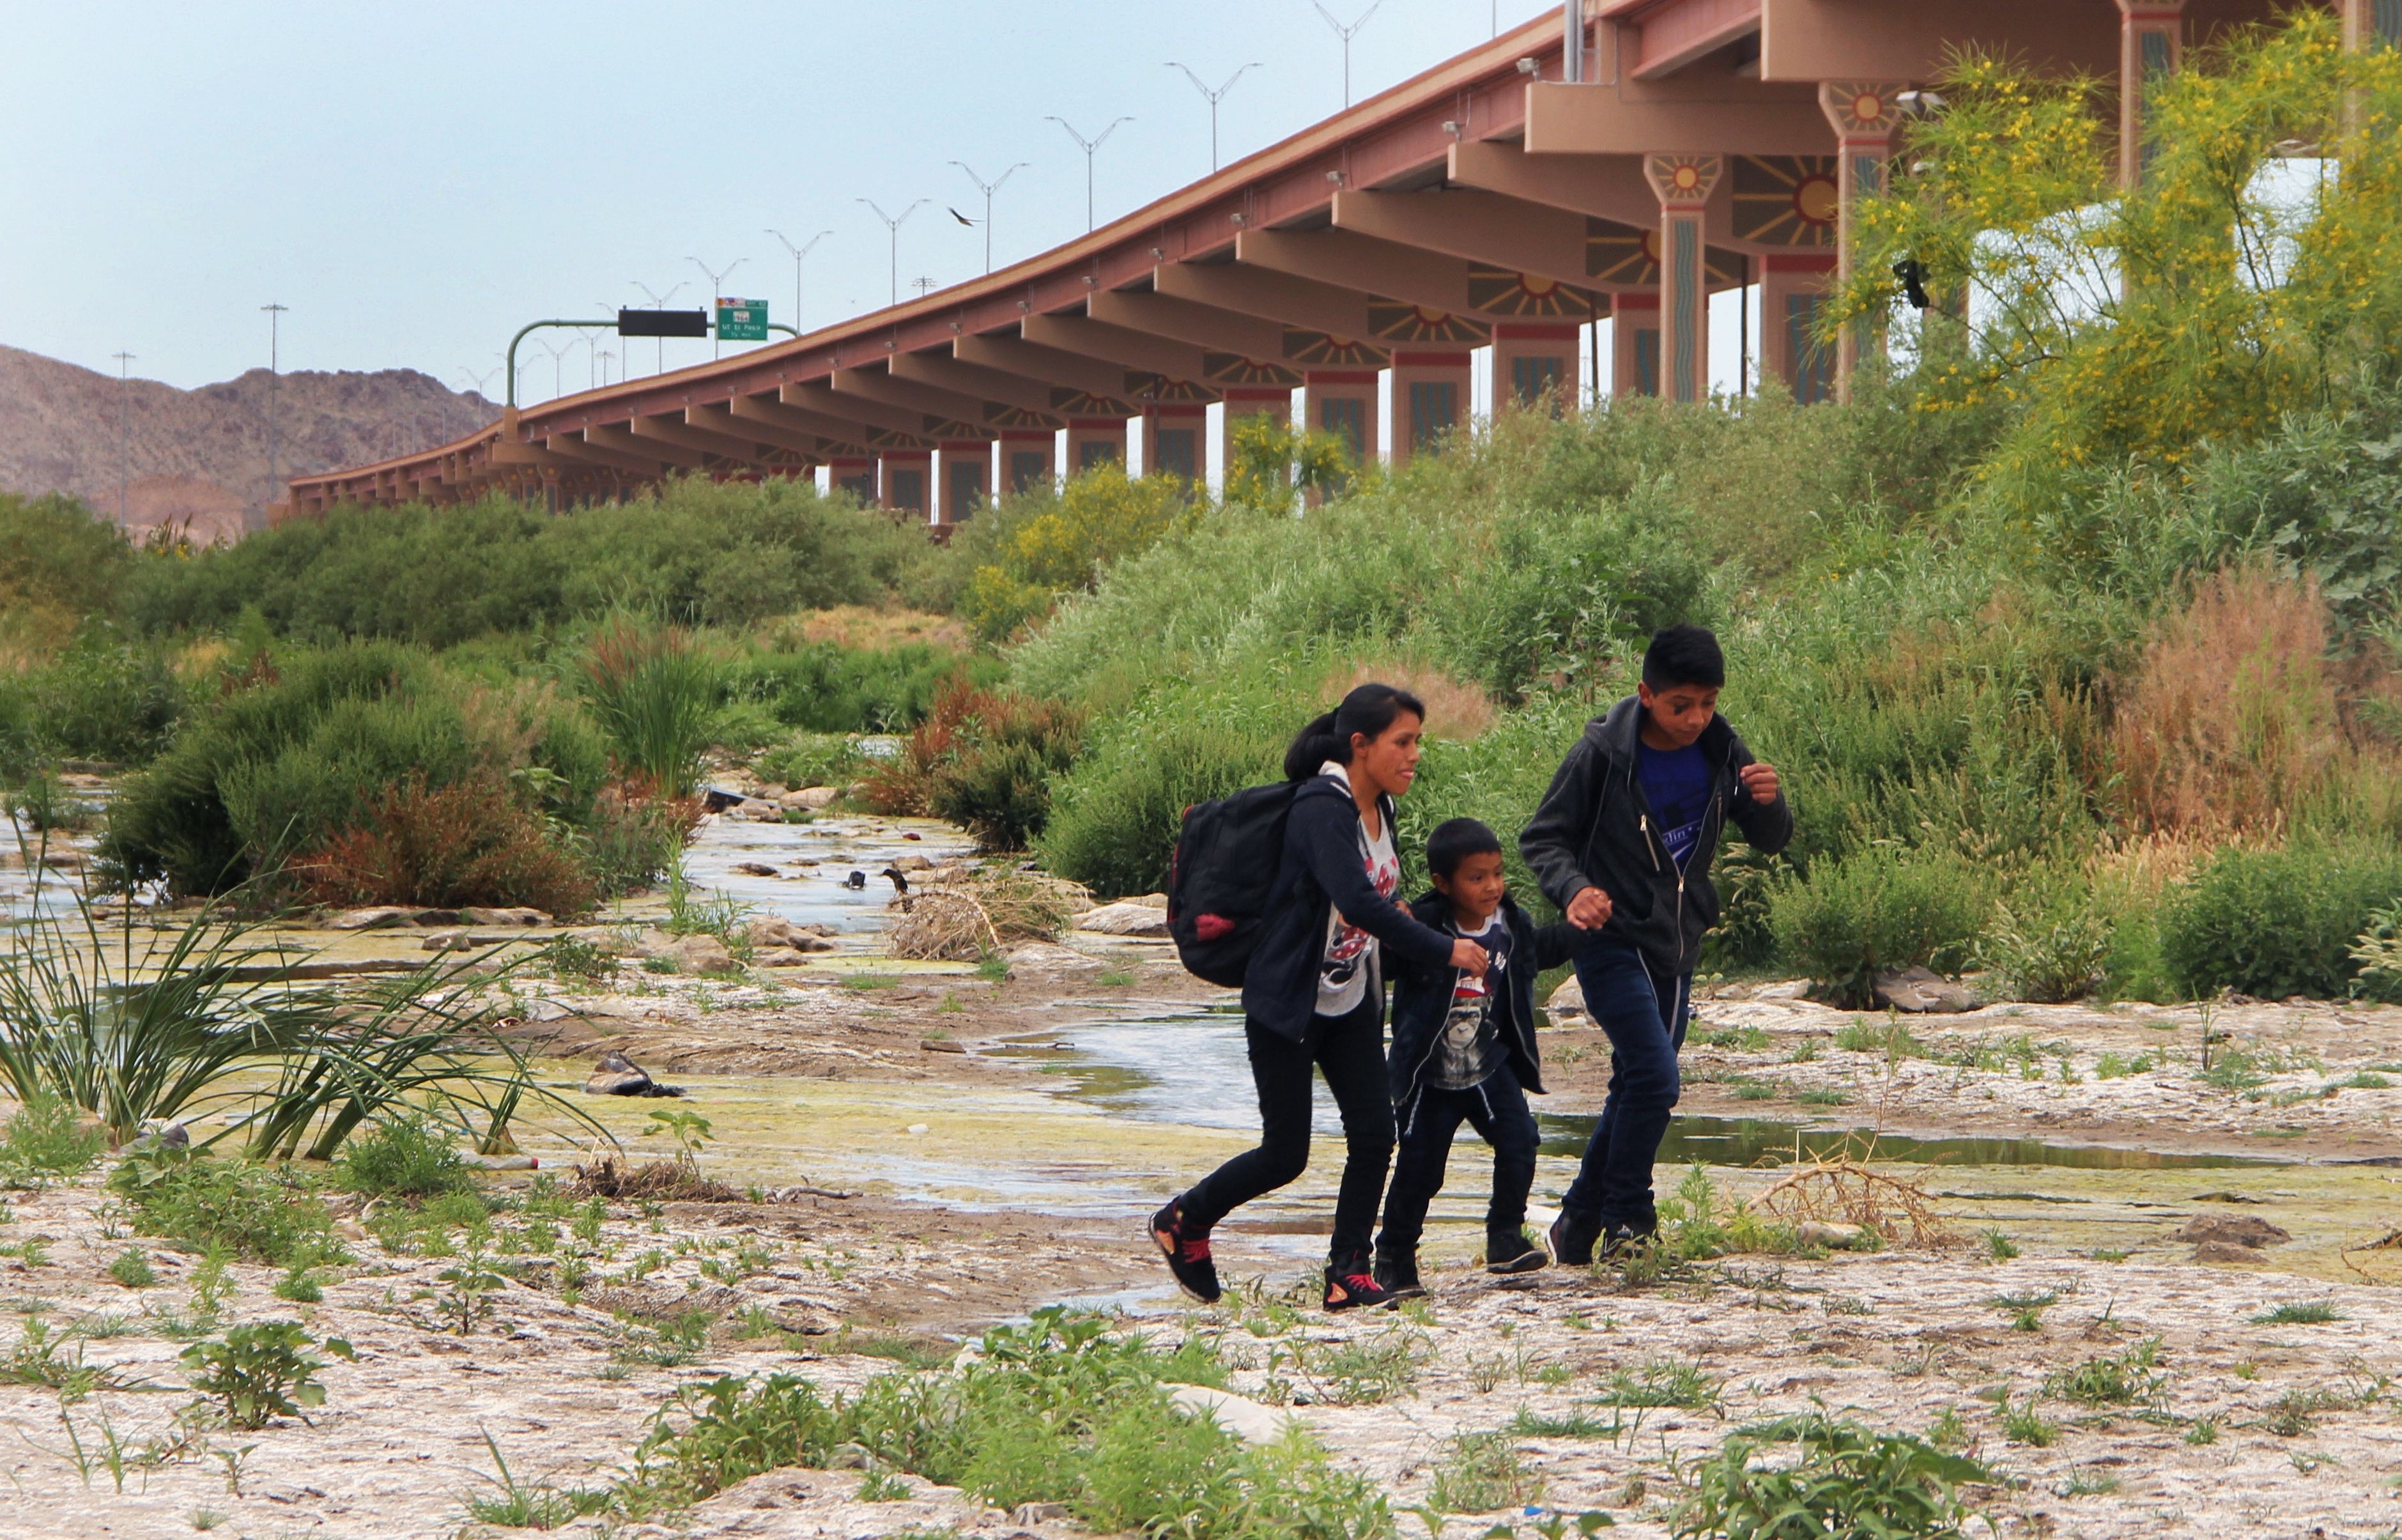 Central American migrants cross the border between Ciudad Juarez, Chihuahua State, Mexico and El Paso, Texas, US, before being detained by US Customs and Border Patrol agents on May 7, 2019. (Photo by HERIKA MARTINEZ/AFP/Getty Images)